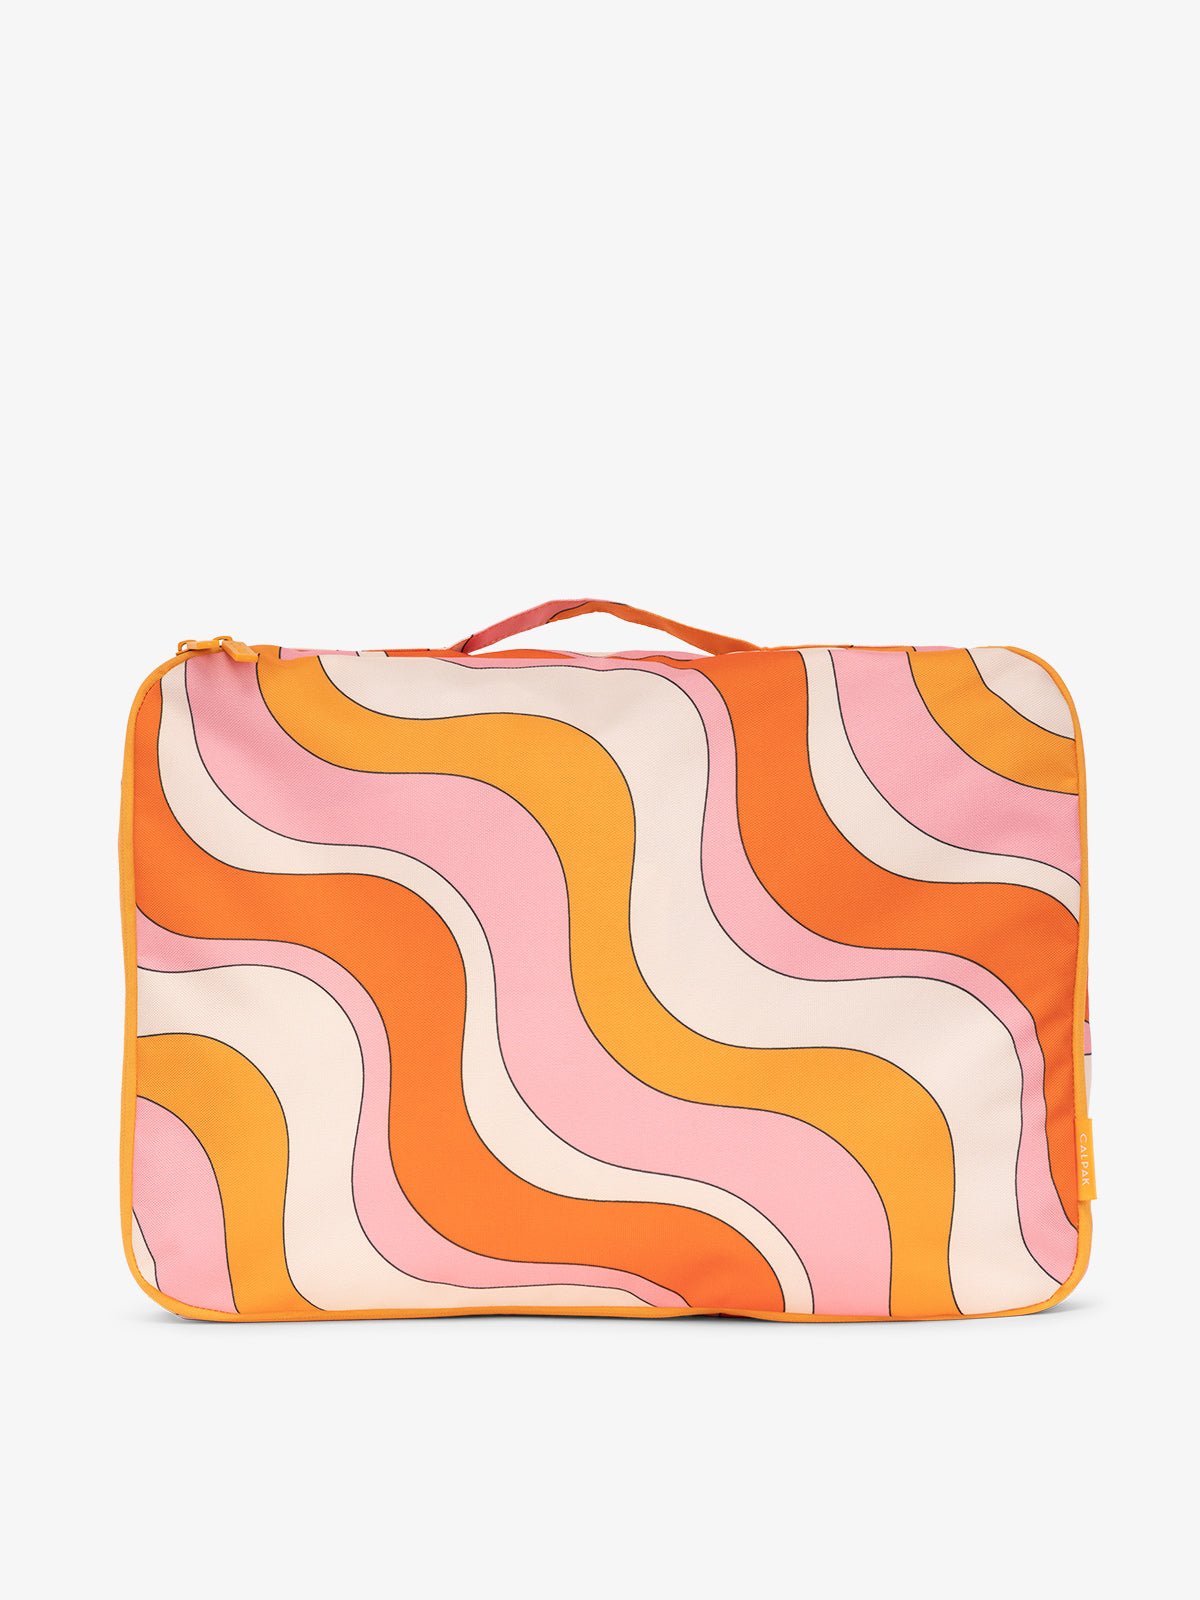 CALPAK large packing cubes with top handle in retro sunset